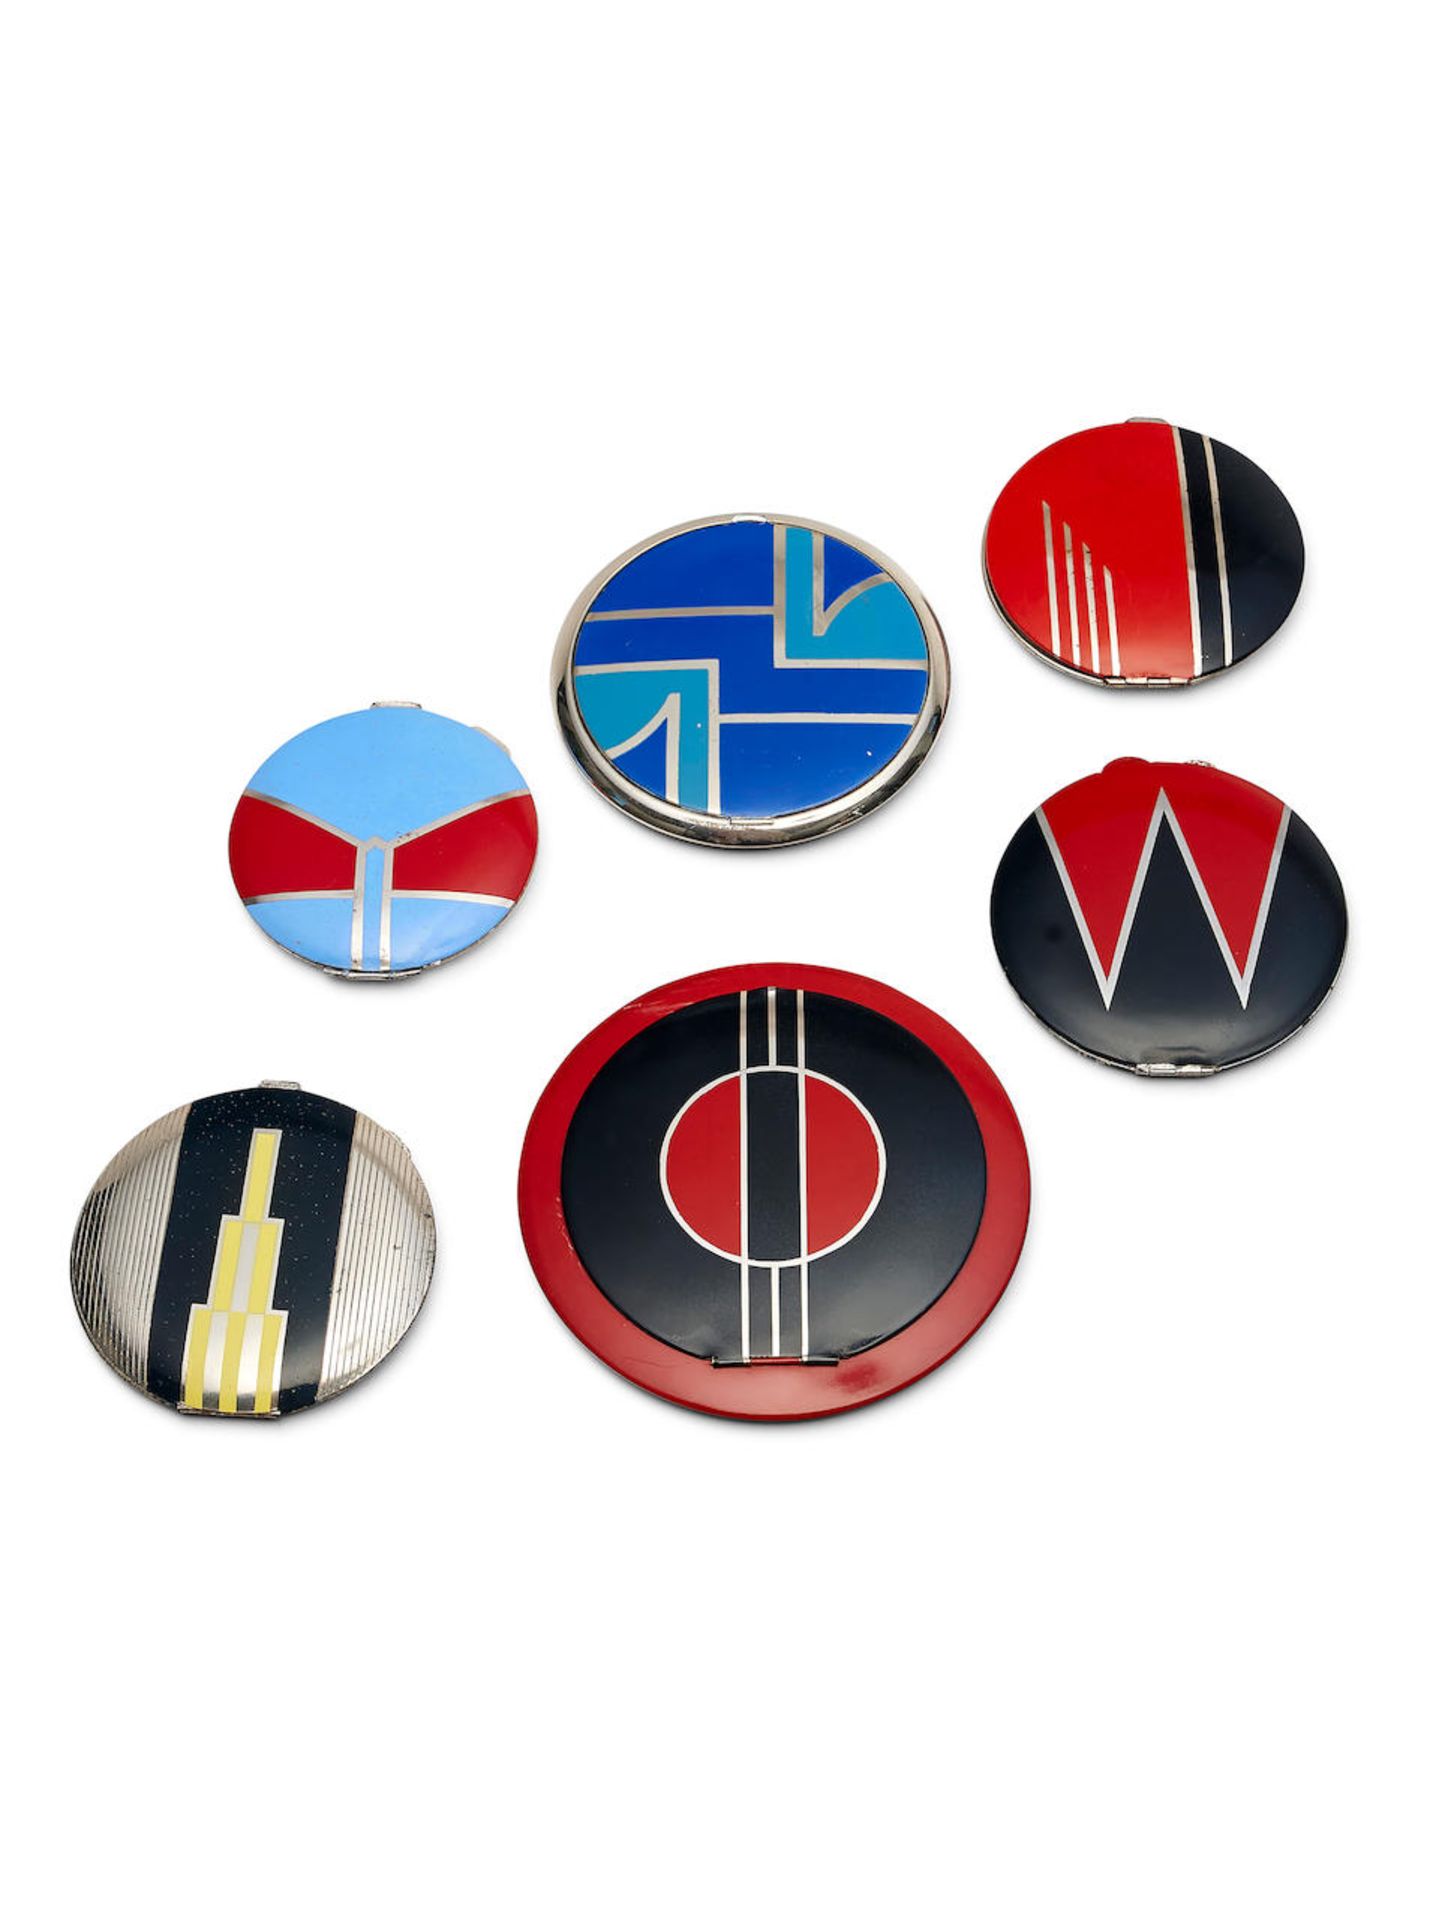 A GROUP OF SIX ENAMEL COMPACTS